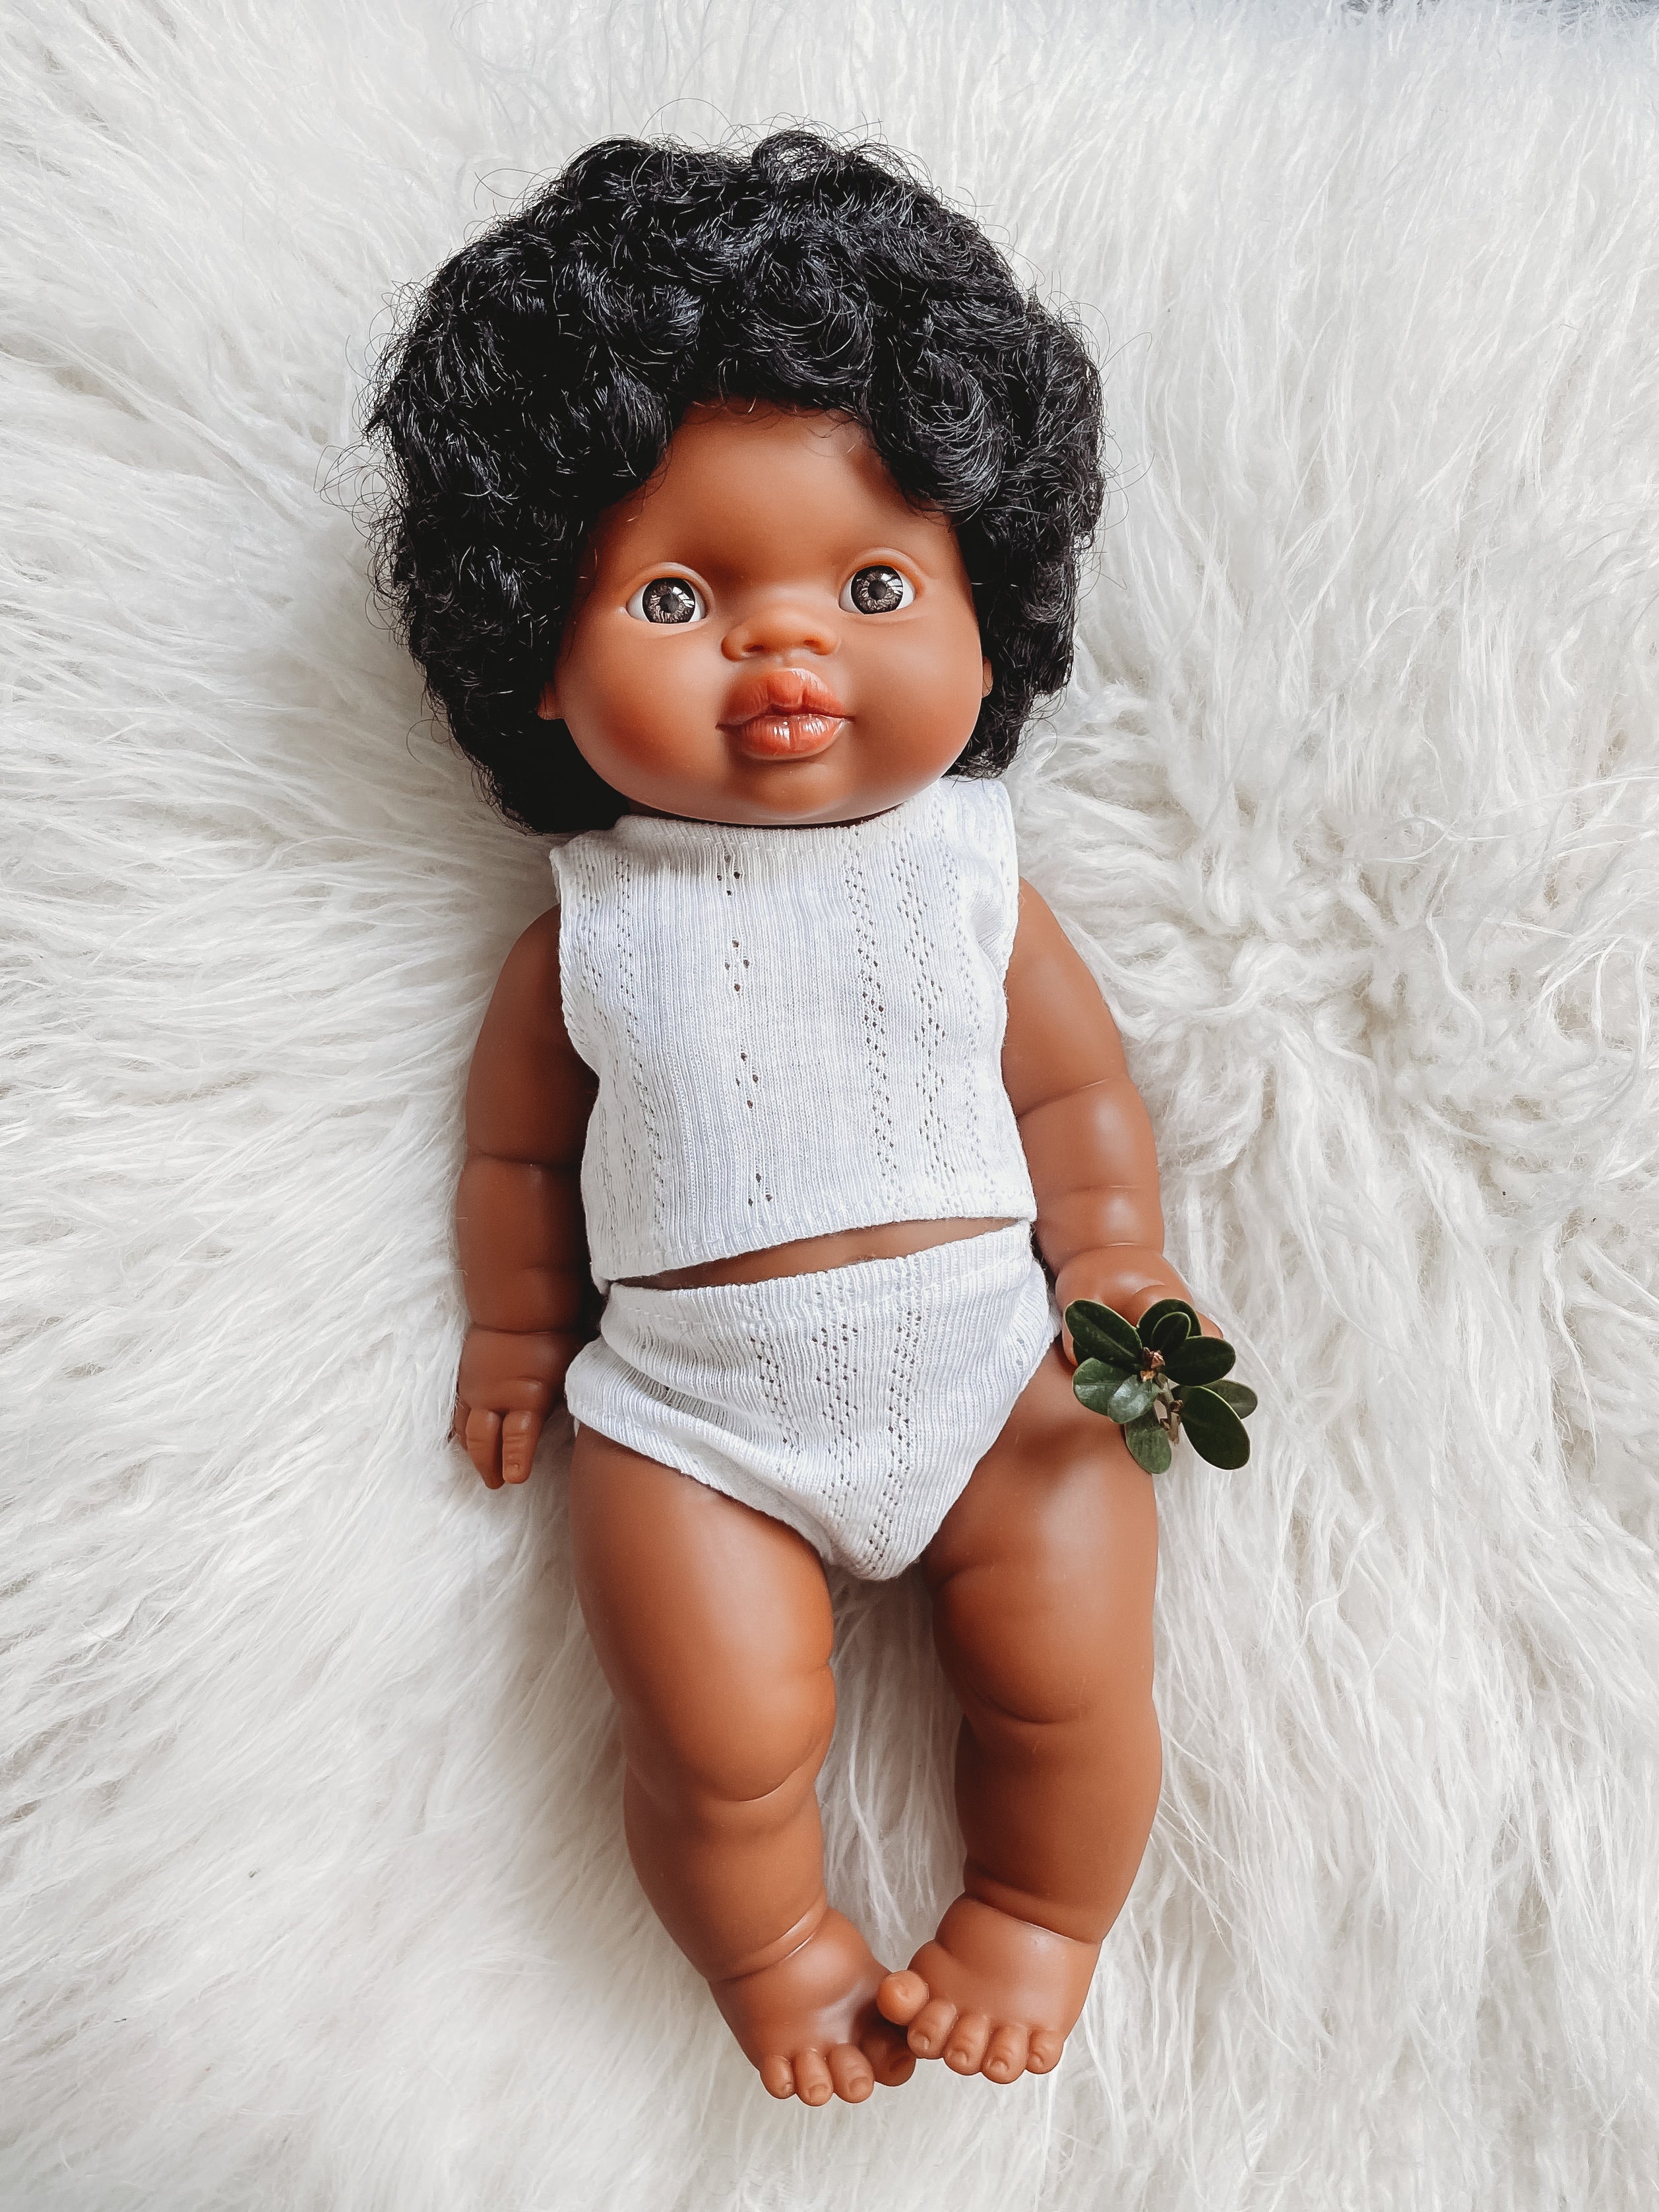 Lucilla - Fully Dressed Mia Doll with Black Hair – Jolee James Baby + Child